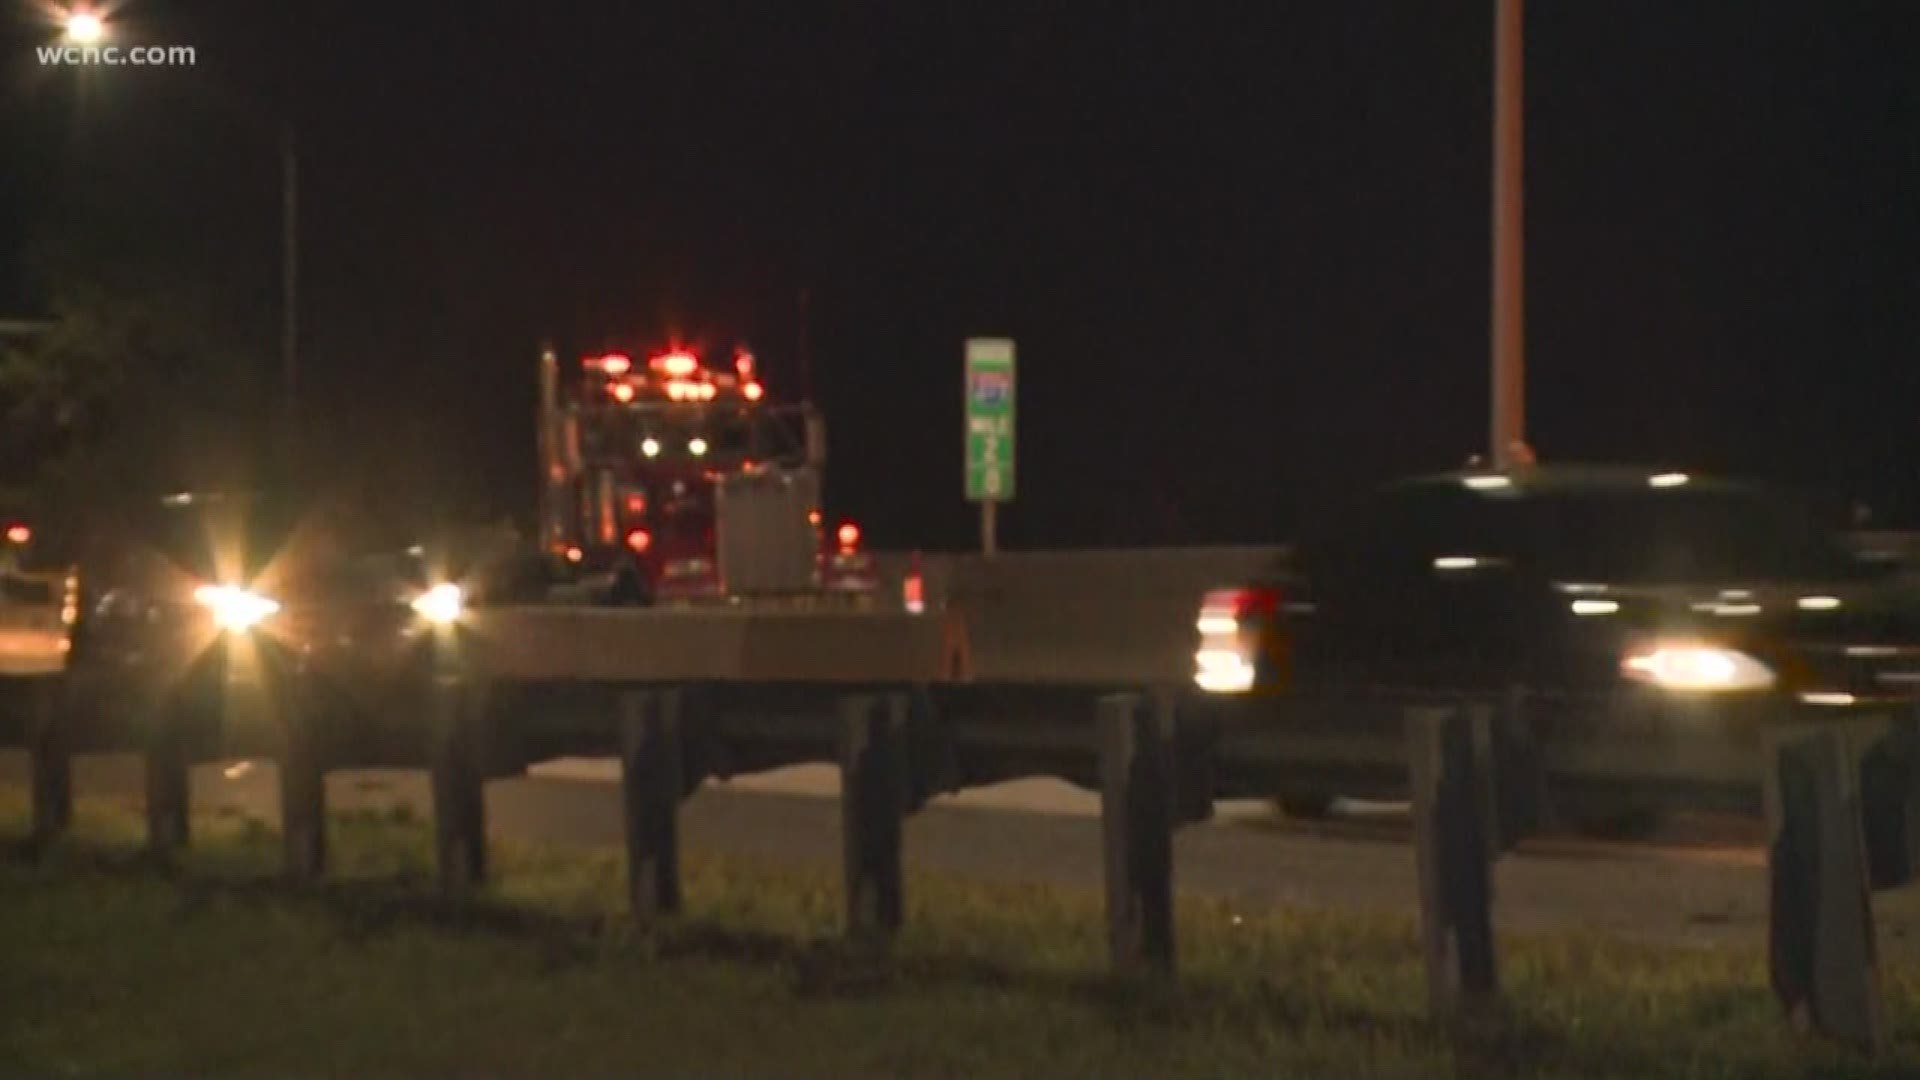 Drivers on I-277 will see some major changes that will cause delays to their commute.